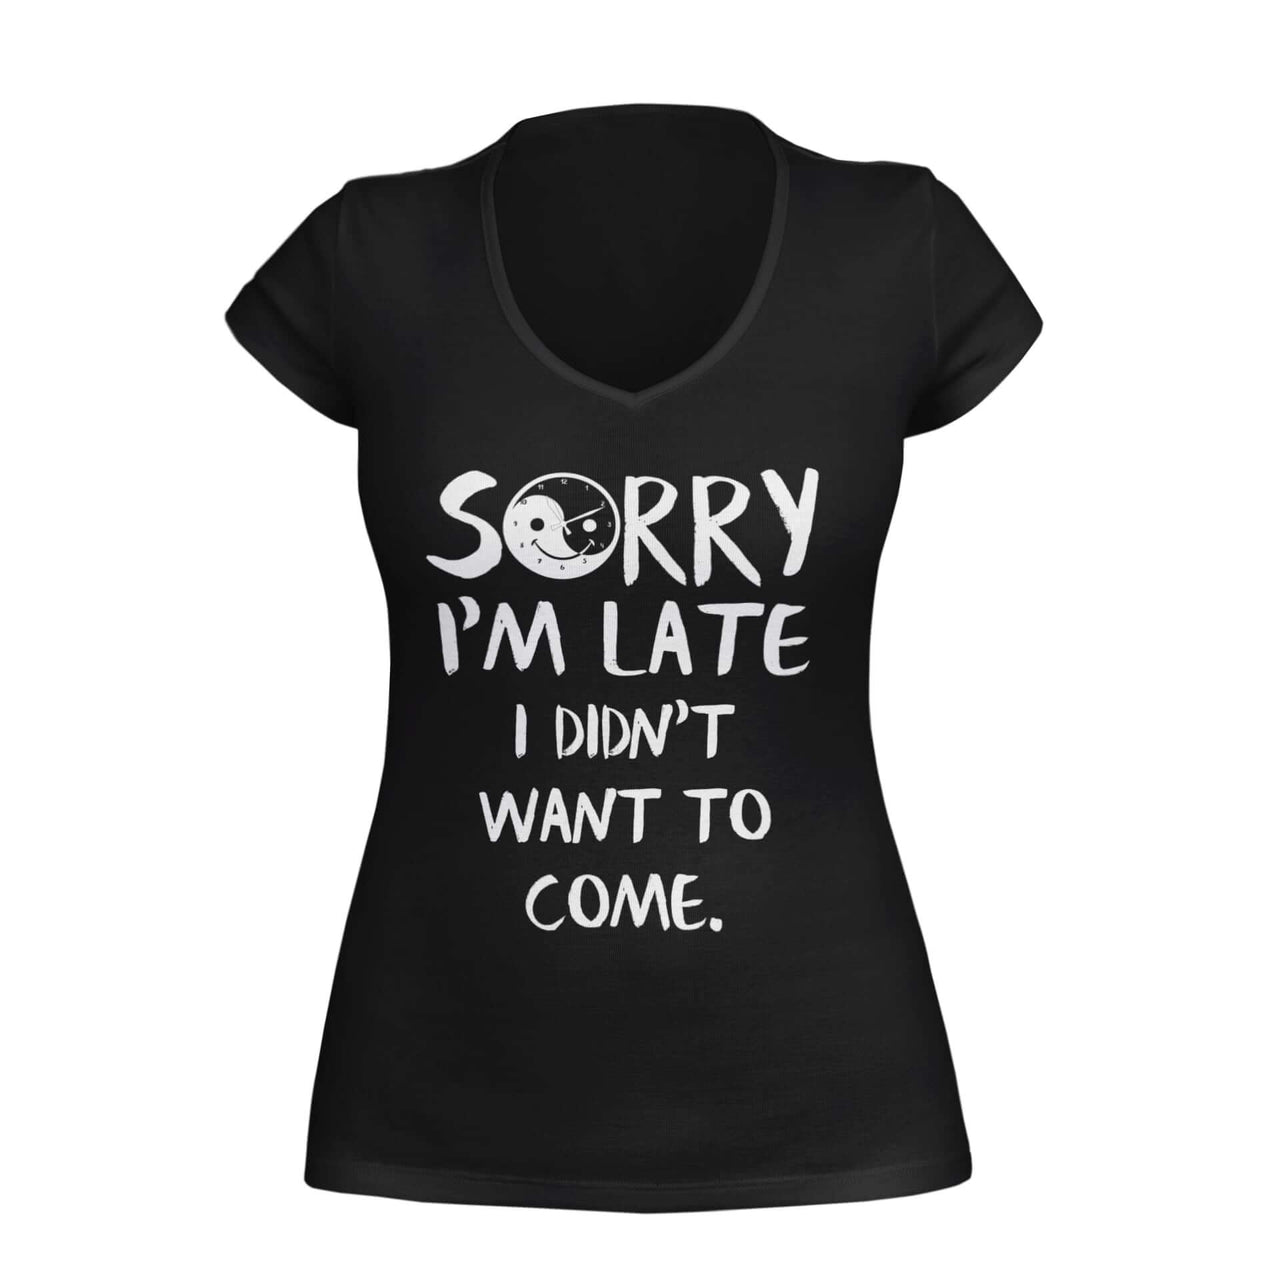 VNeck t-shirt featuring the text 'Sorry I am late, I didn't want to come', with a Yin Yang symbol smiling in the 'o'. Designed by WooHoo Apparel.